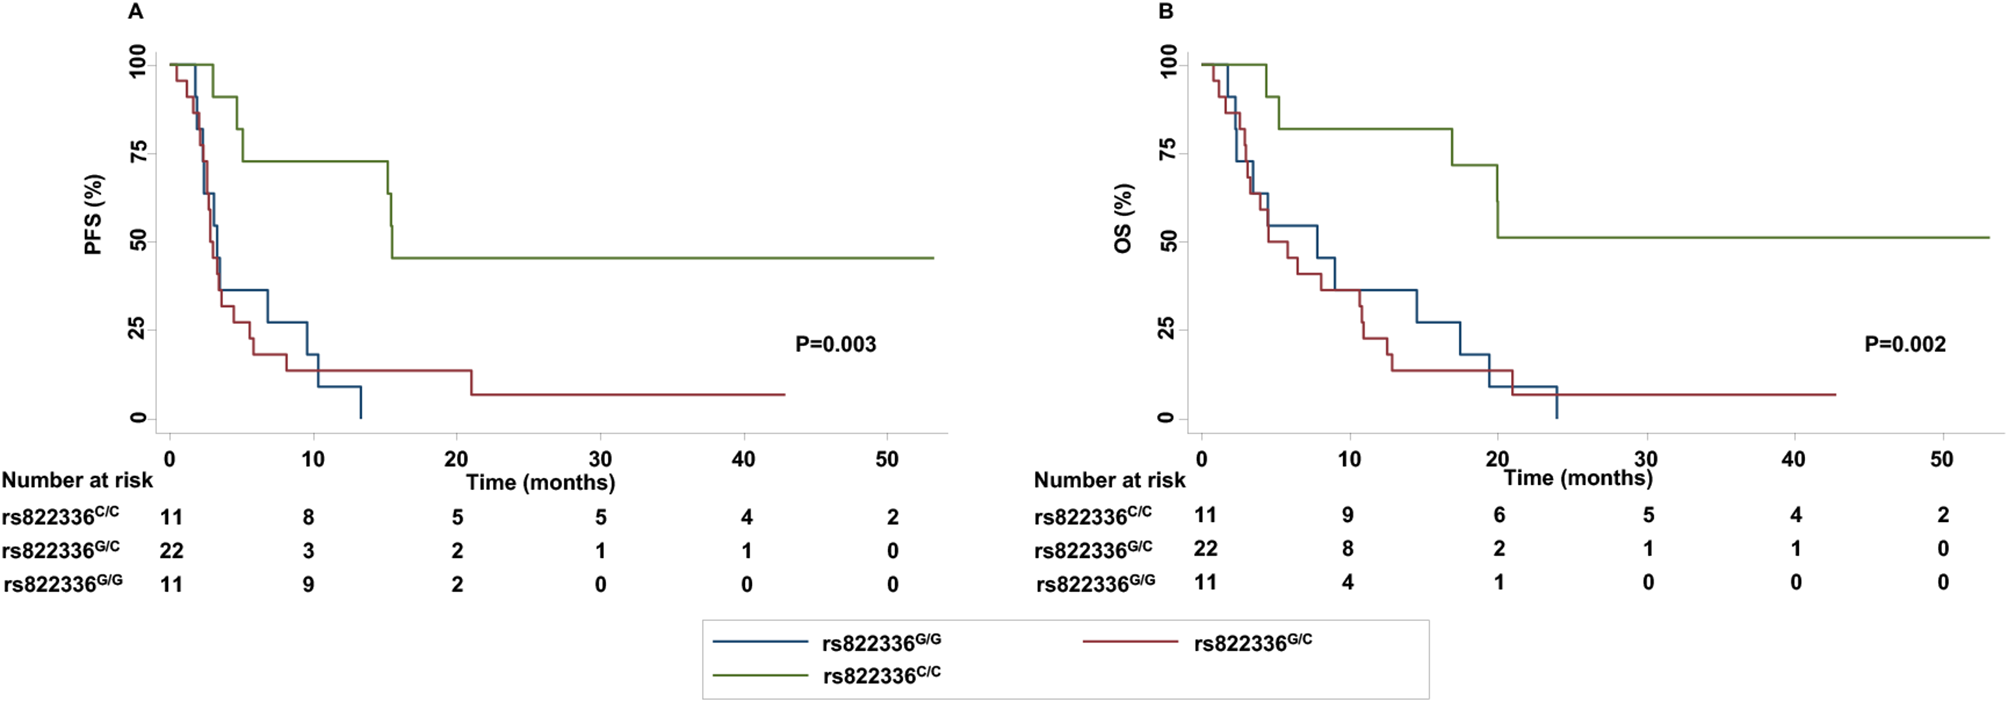 rs822336 binding to C/EBPβ and NFIC modulates induction of PD-L1 expression and predicts anti-PD-1/PD-L1 therapy in advanced NSCLC